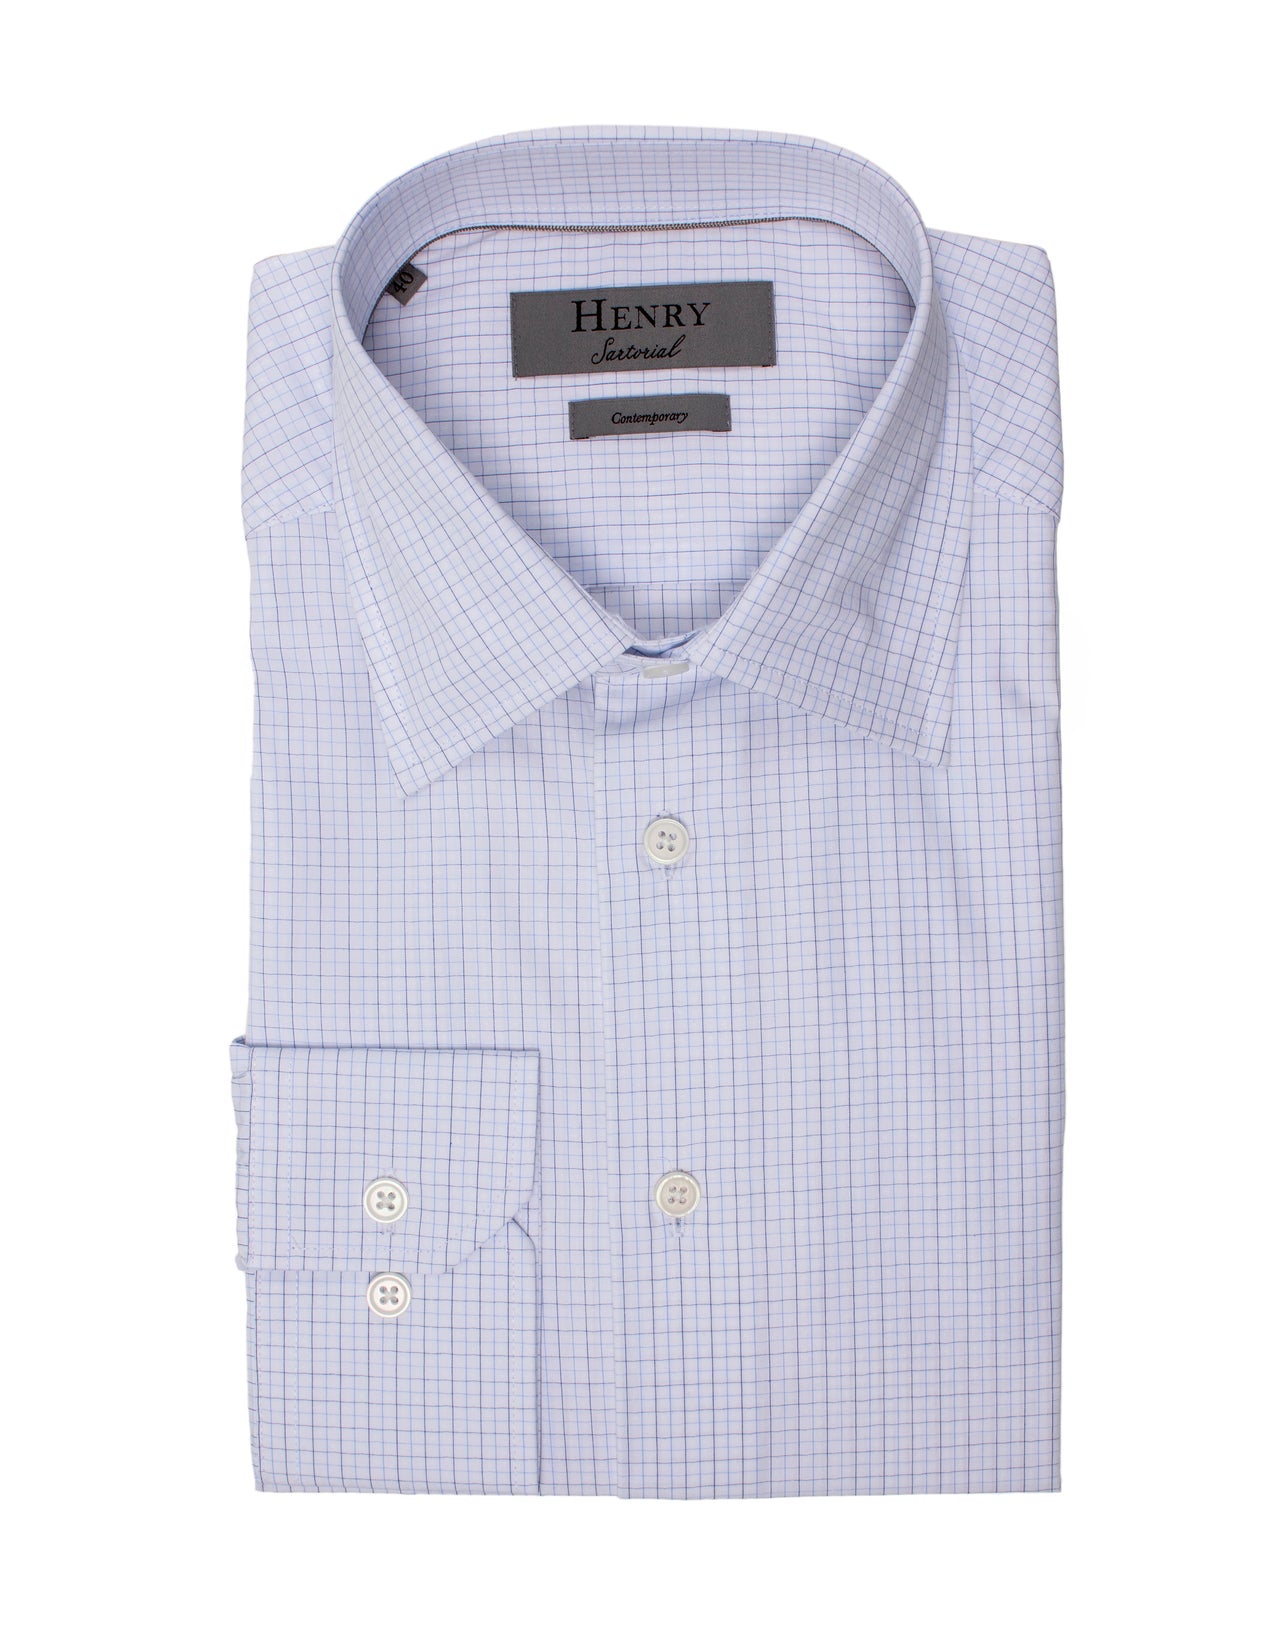 HENRY SARTORIAL Classic Fit Check Shirt MULTI